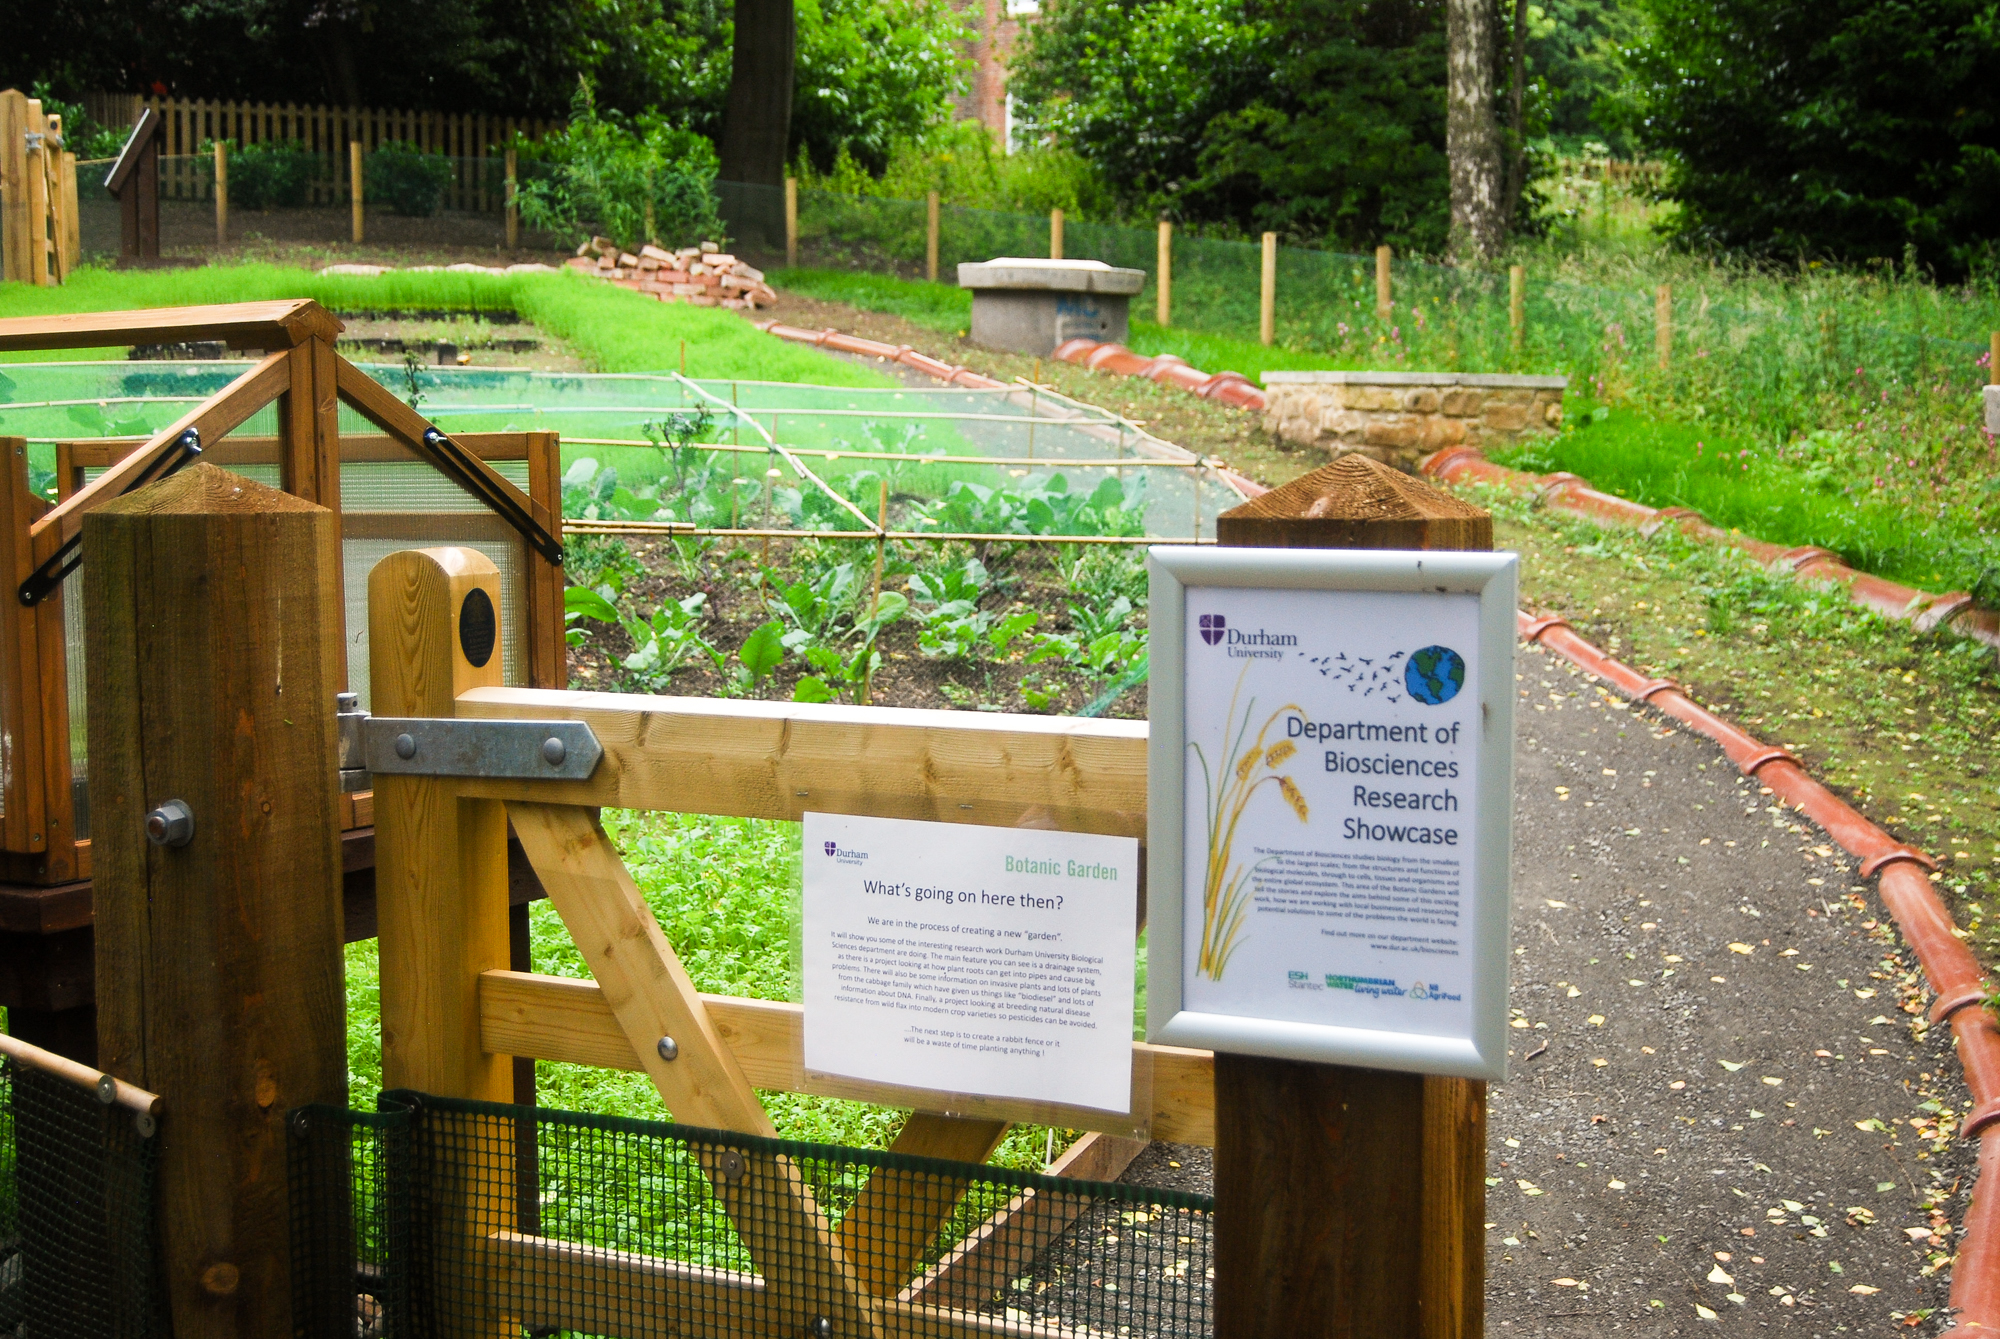 The Department of Biosciences Research Showcase area at the Botanic Garden